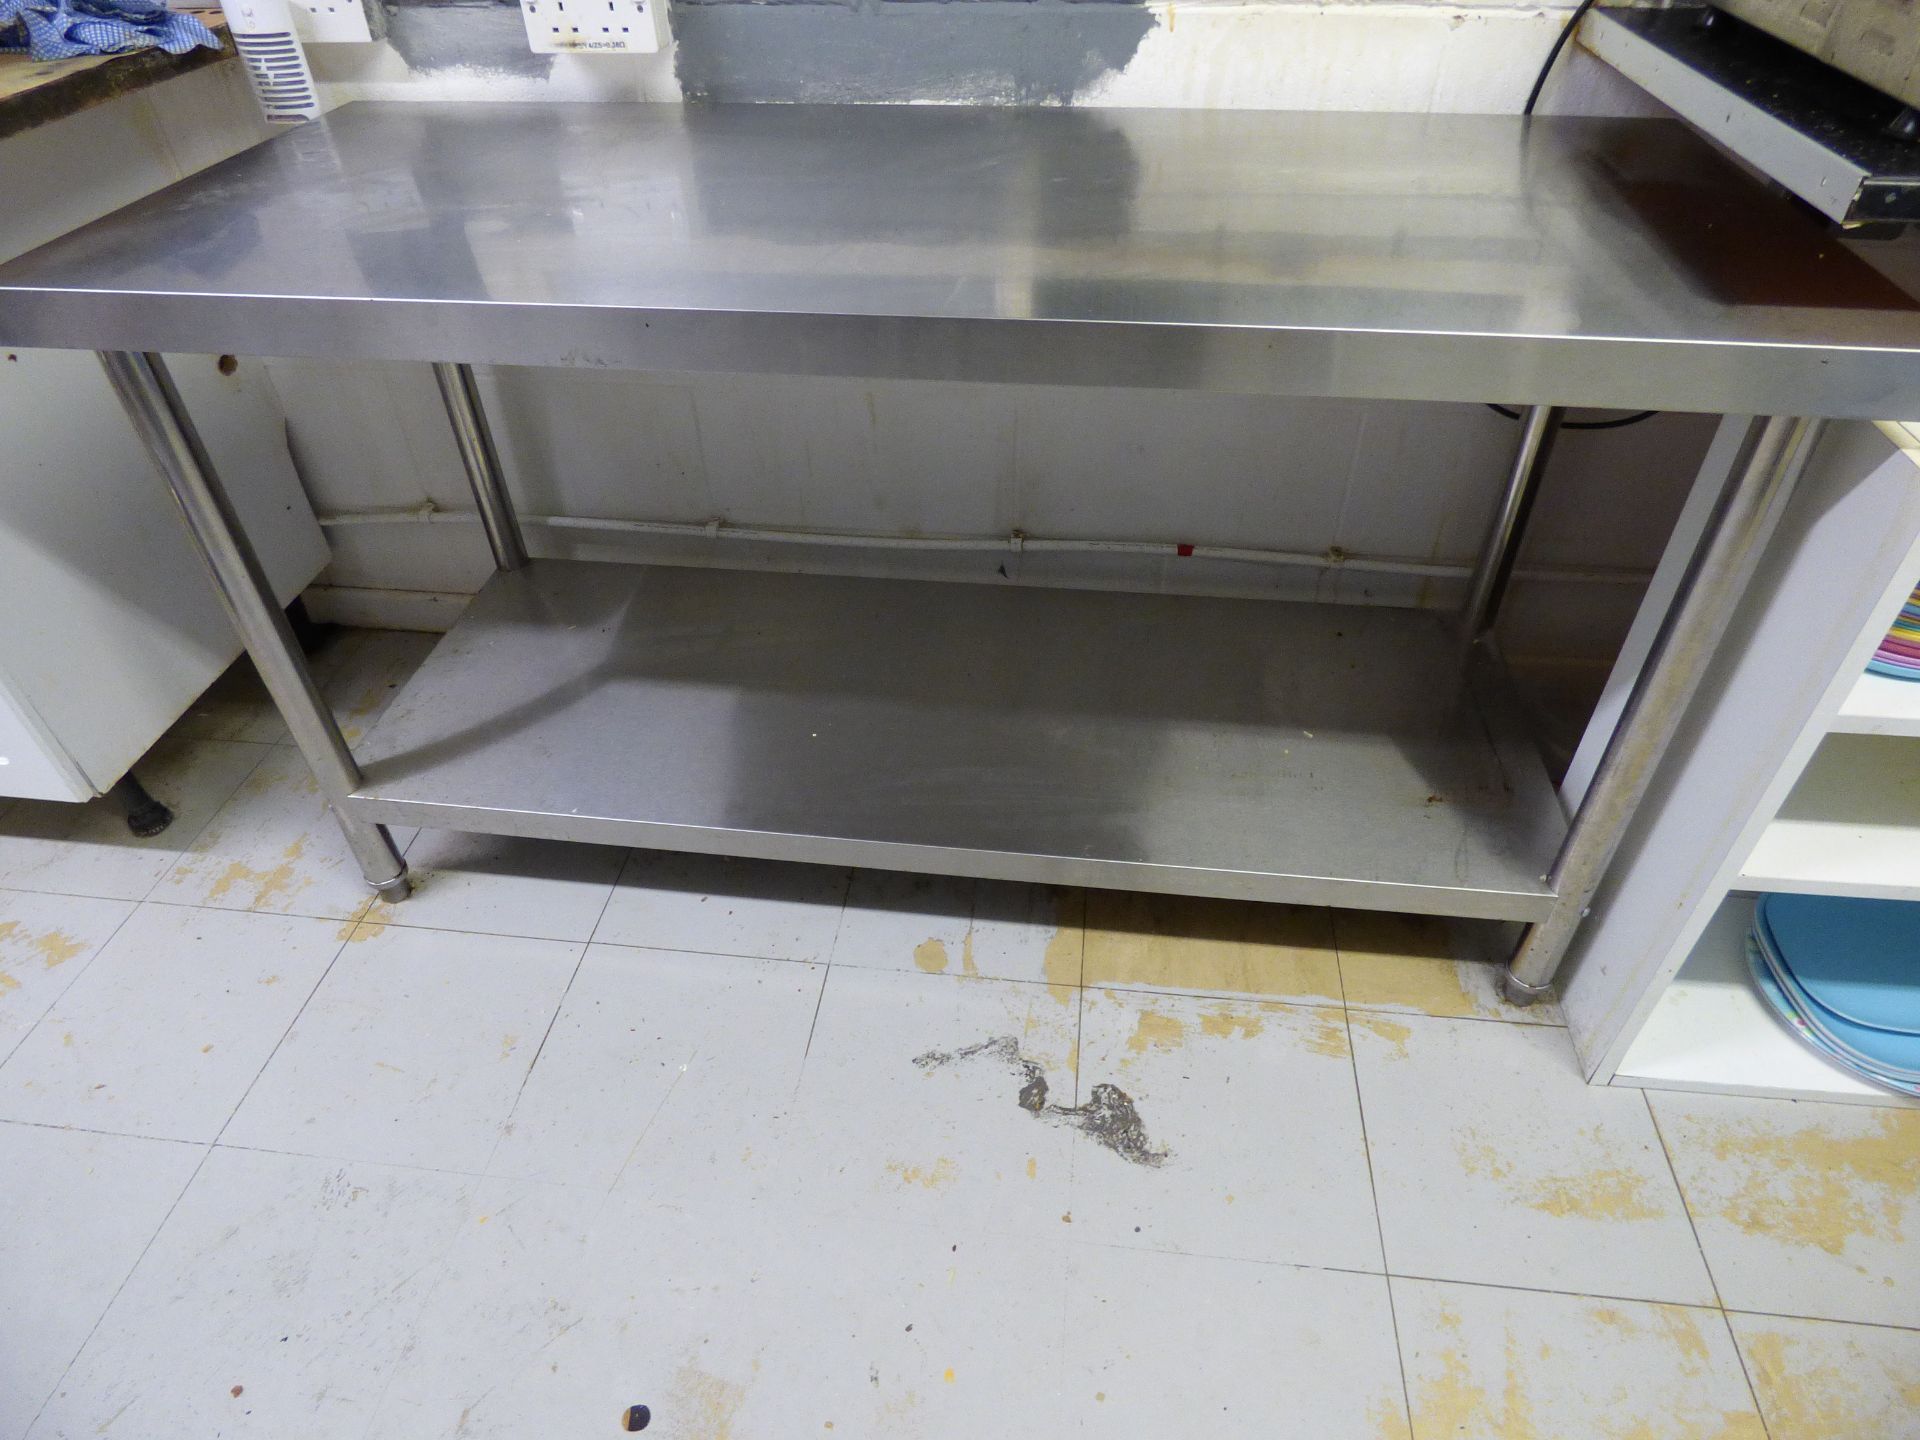 Stainless Steel Work Surface/Shelf Unit - Image 6 of 6